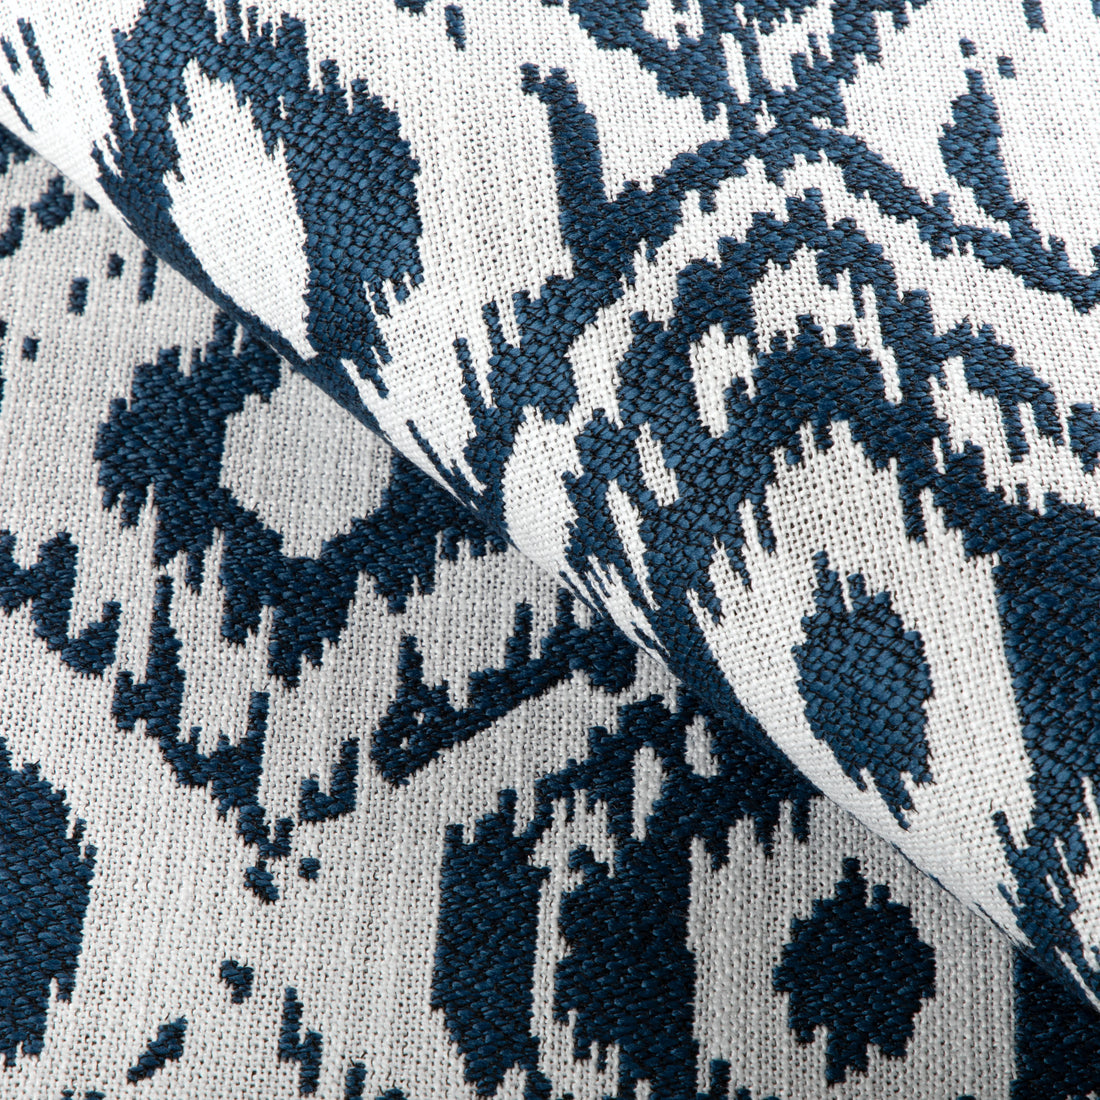 Fabric sample of Milos Damask fabric in marine color - pattern 36921.51.0 - by Kravet Couture in the Riviera collection